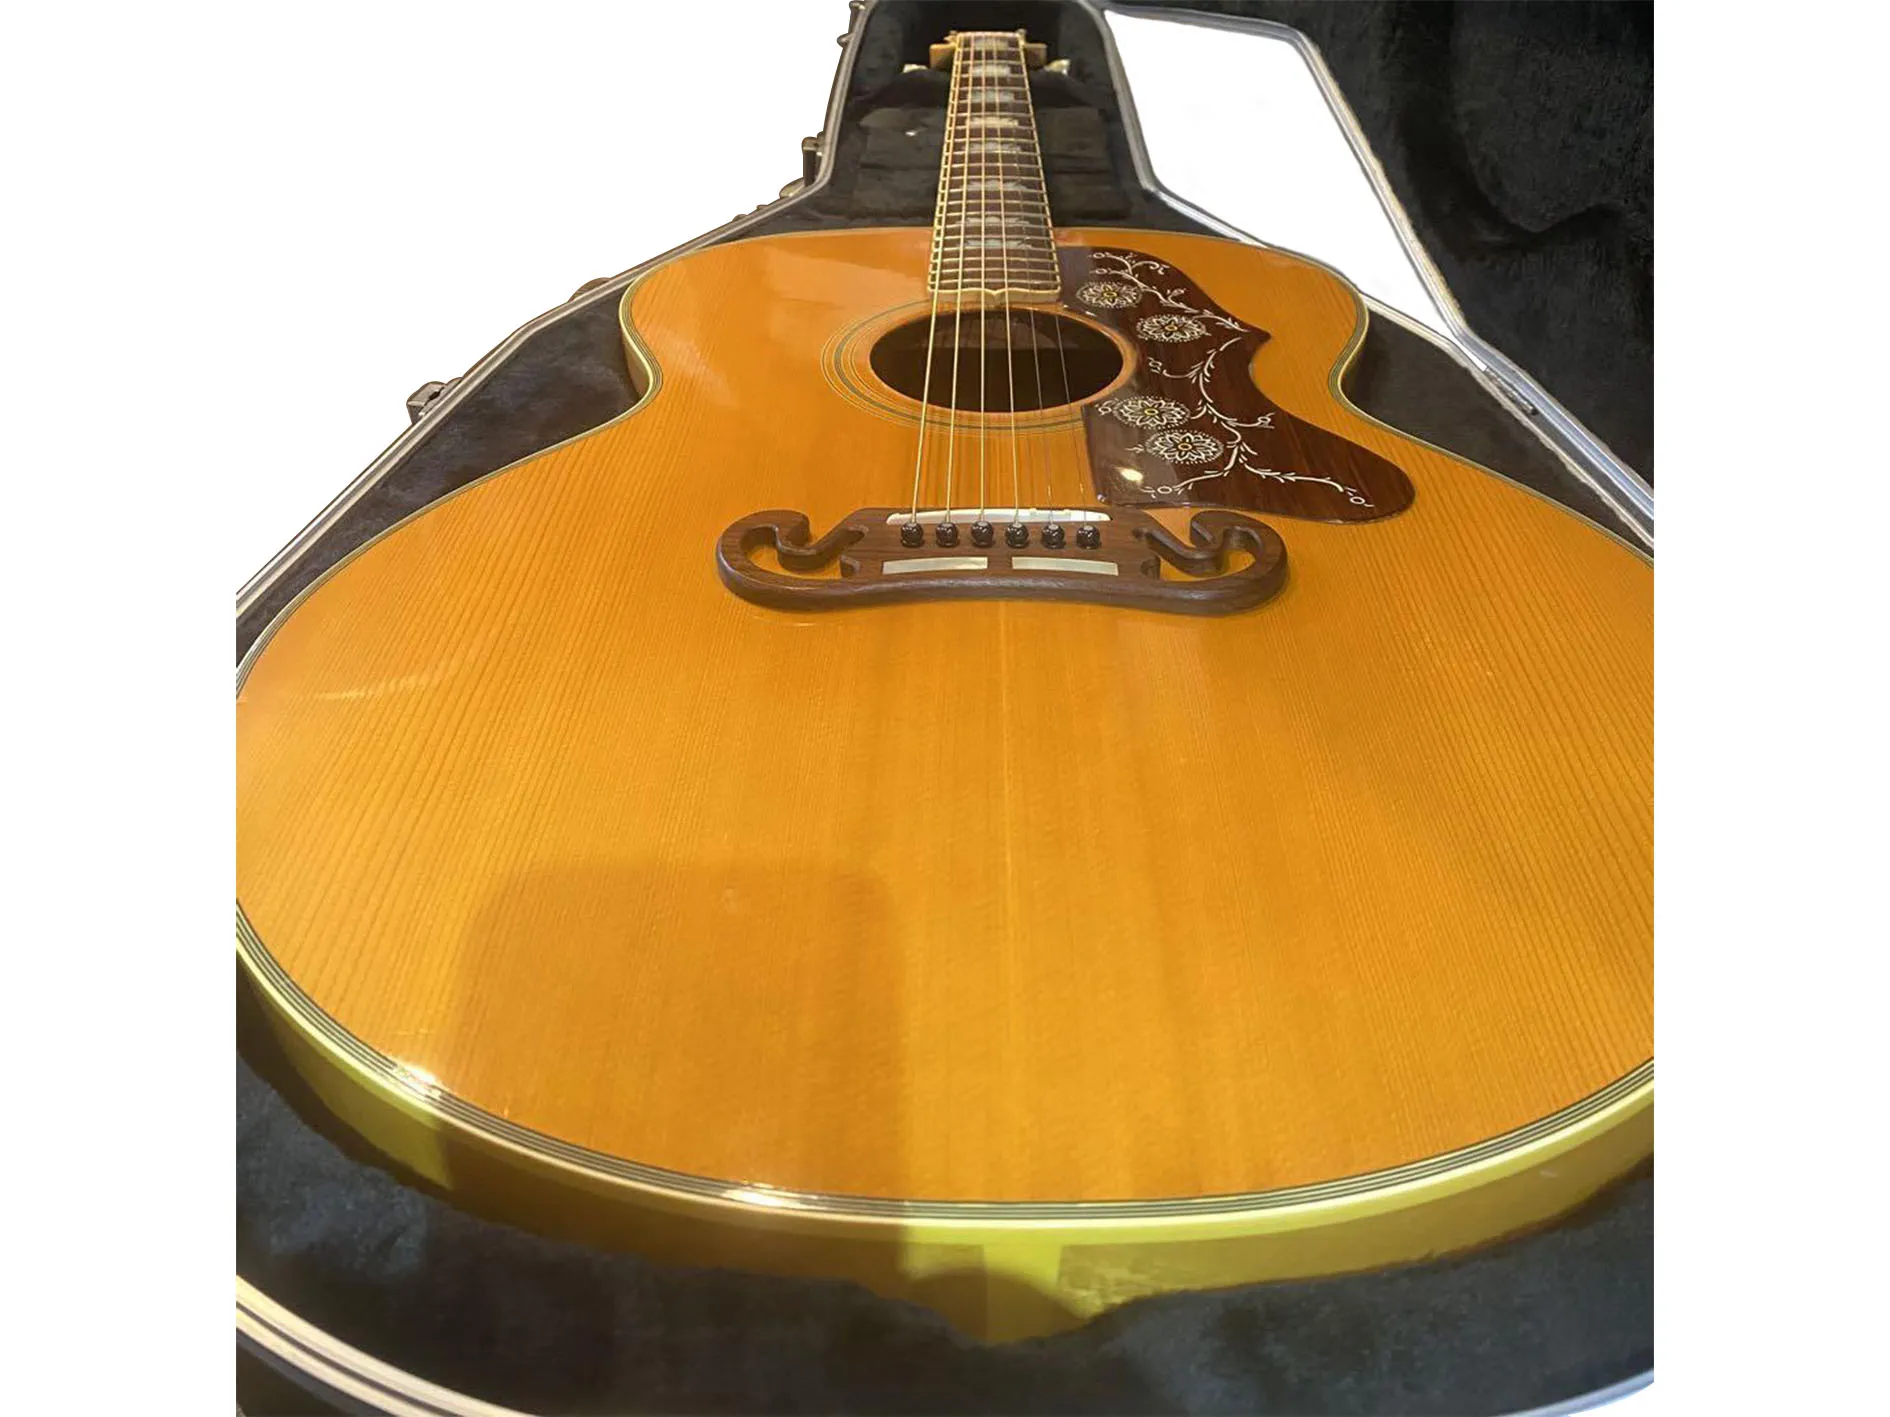 1991 J200 ACOUSTIC GUITAR as same of the pictures